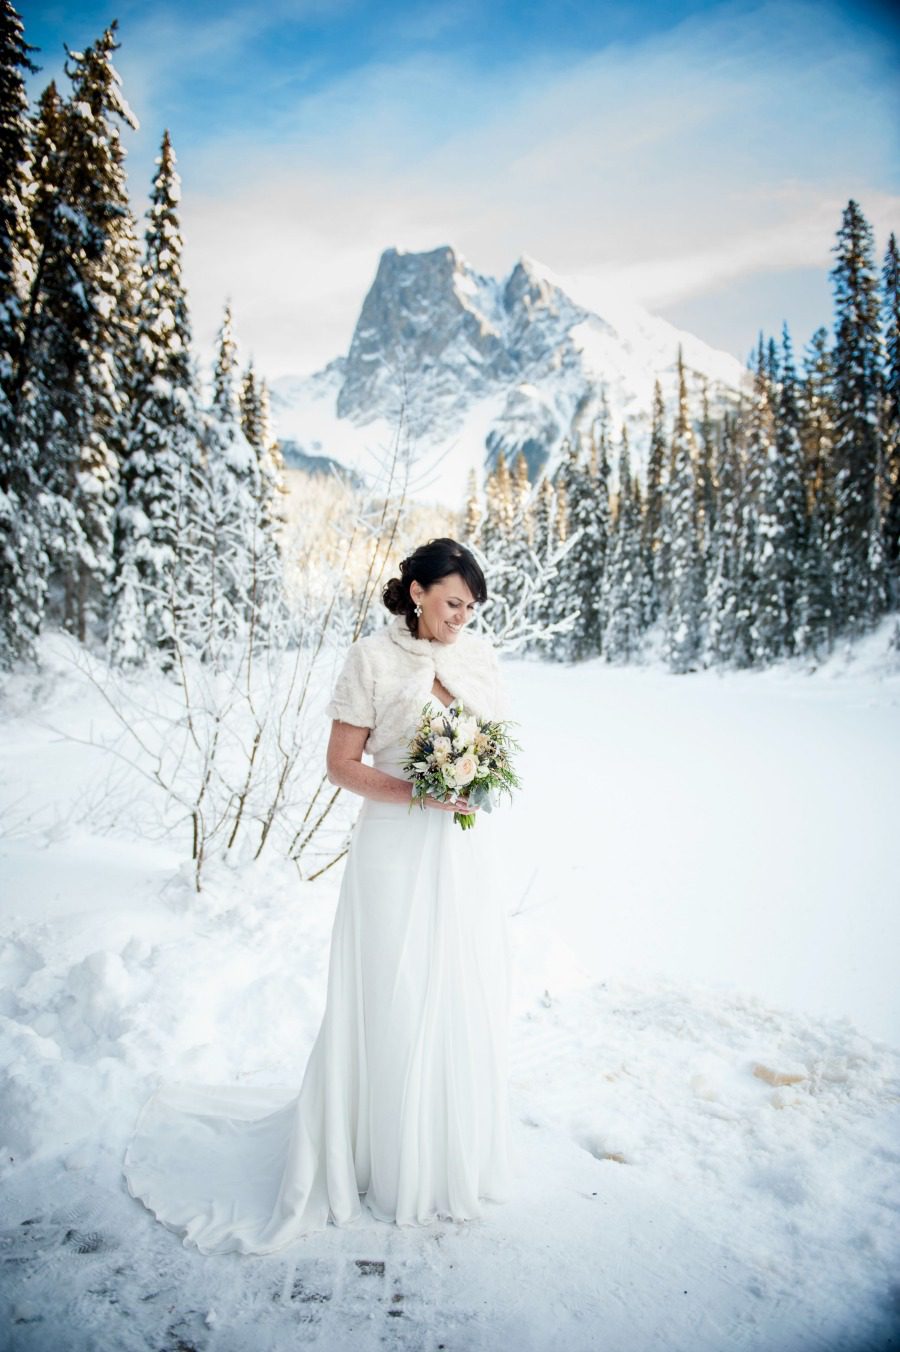 Emerald Lake winter wedding from Naturally Chic| Photo Credit: f8 Photography Inc.